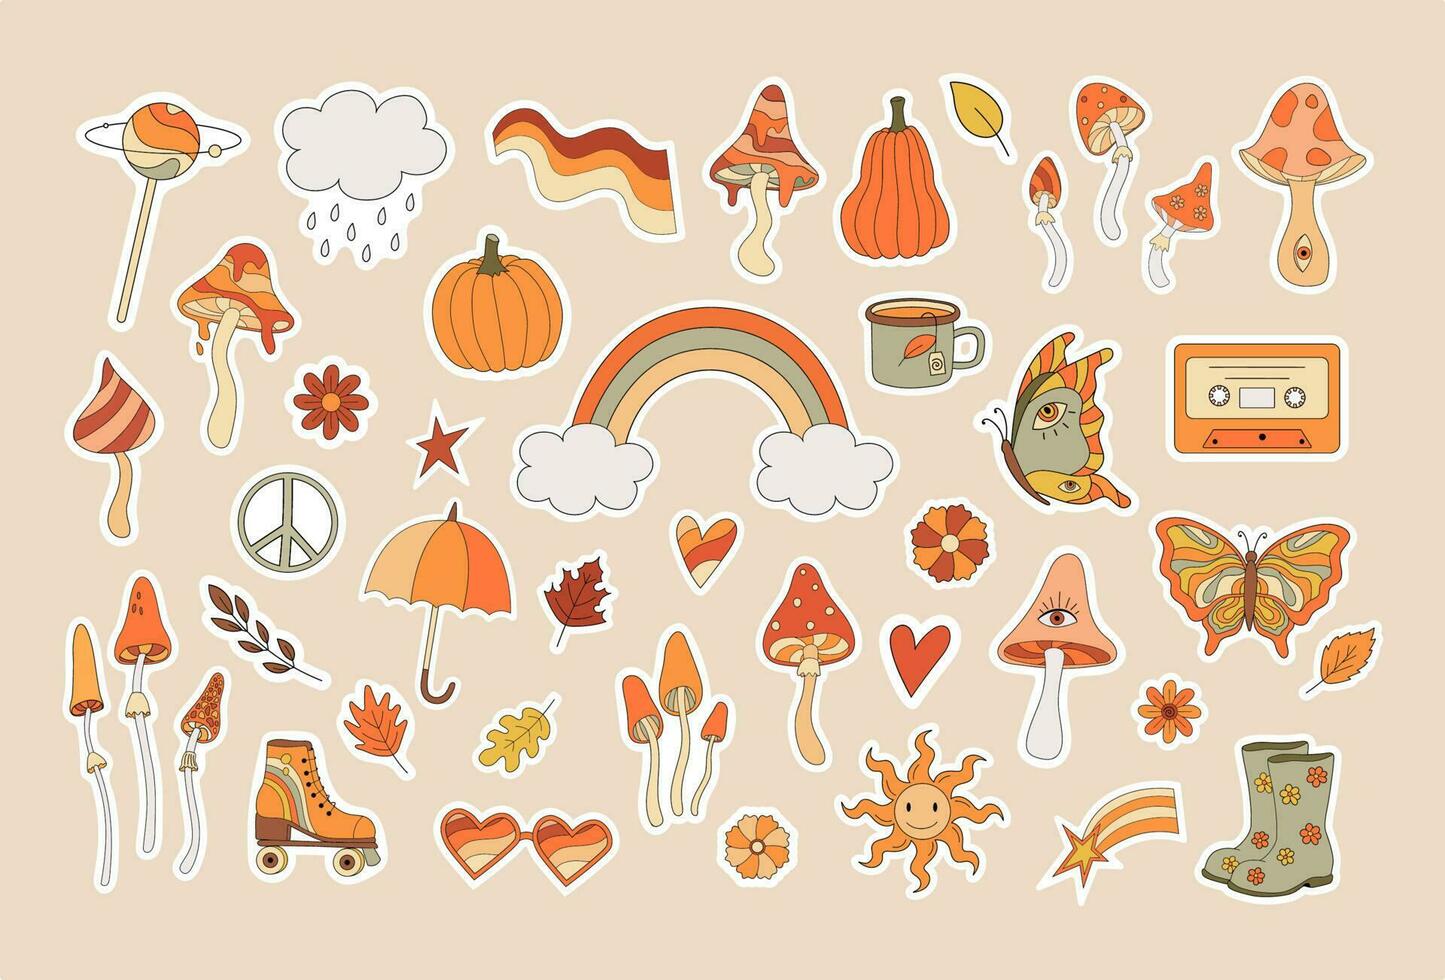 Set of 80s fall vibe stickers. Retro mushroom, rainbow, pumpkins, lips, peace sign, butterfly, hippy style stickers. Vintage psychedelic groovy flat symbols, autumn vibes vector illustration